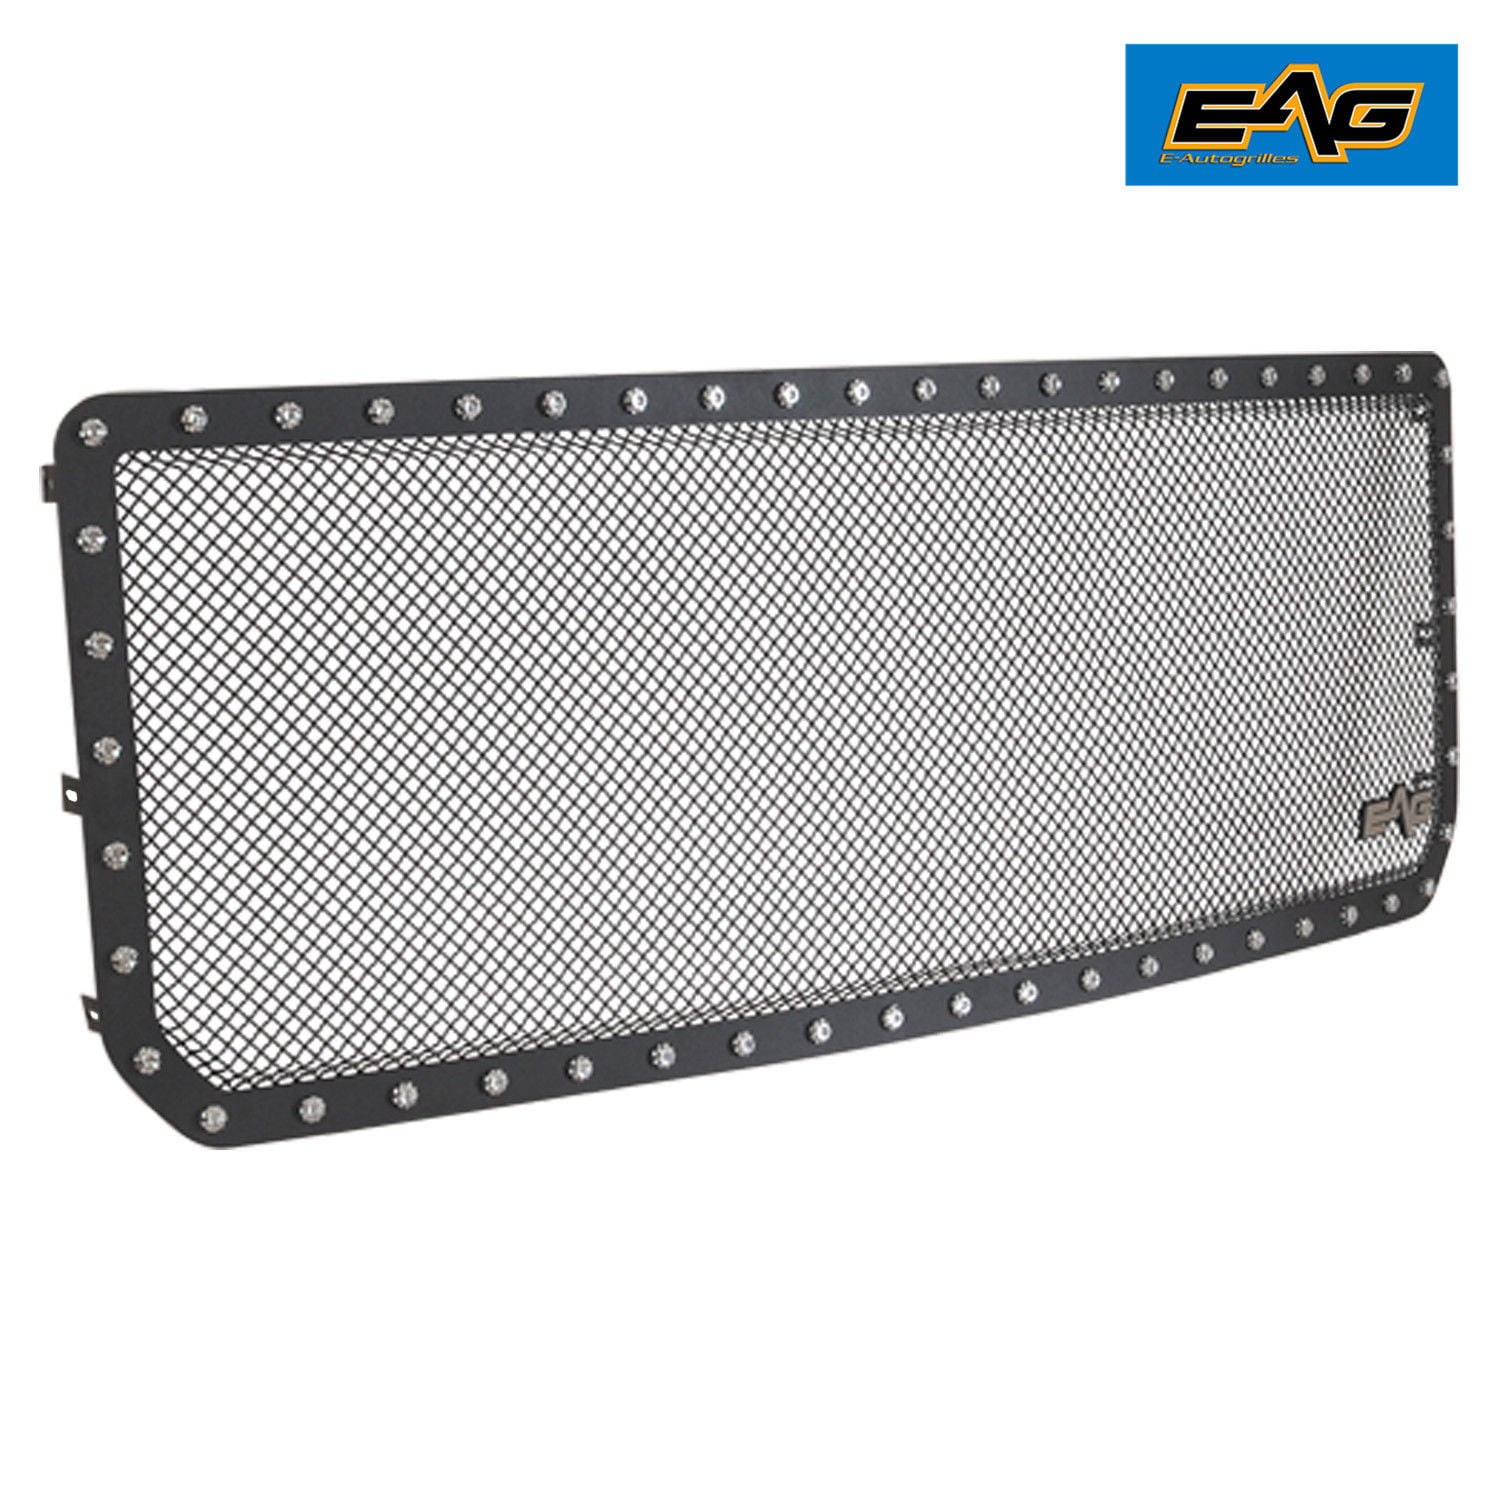 EAG Rivet Black Stainless Steel Wire Mesh Grille Fit for 15-18 GMC Sierra 2500HD/3500HD 